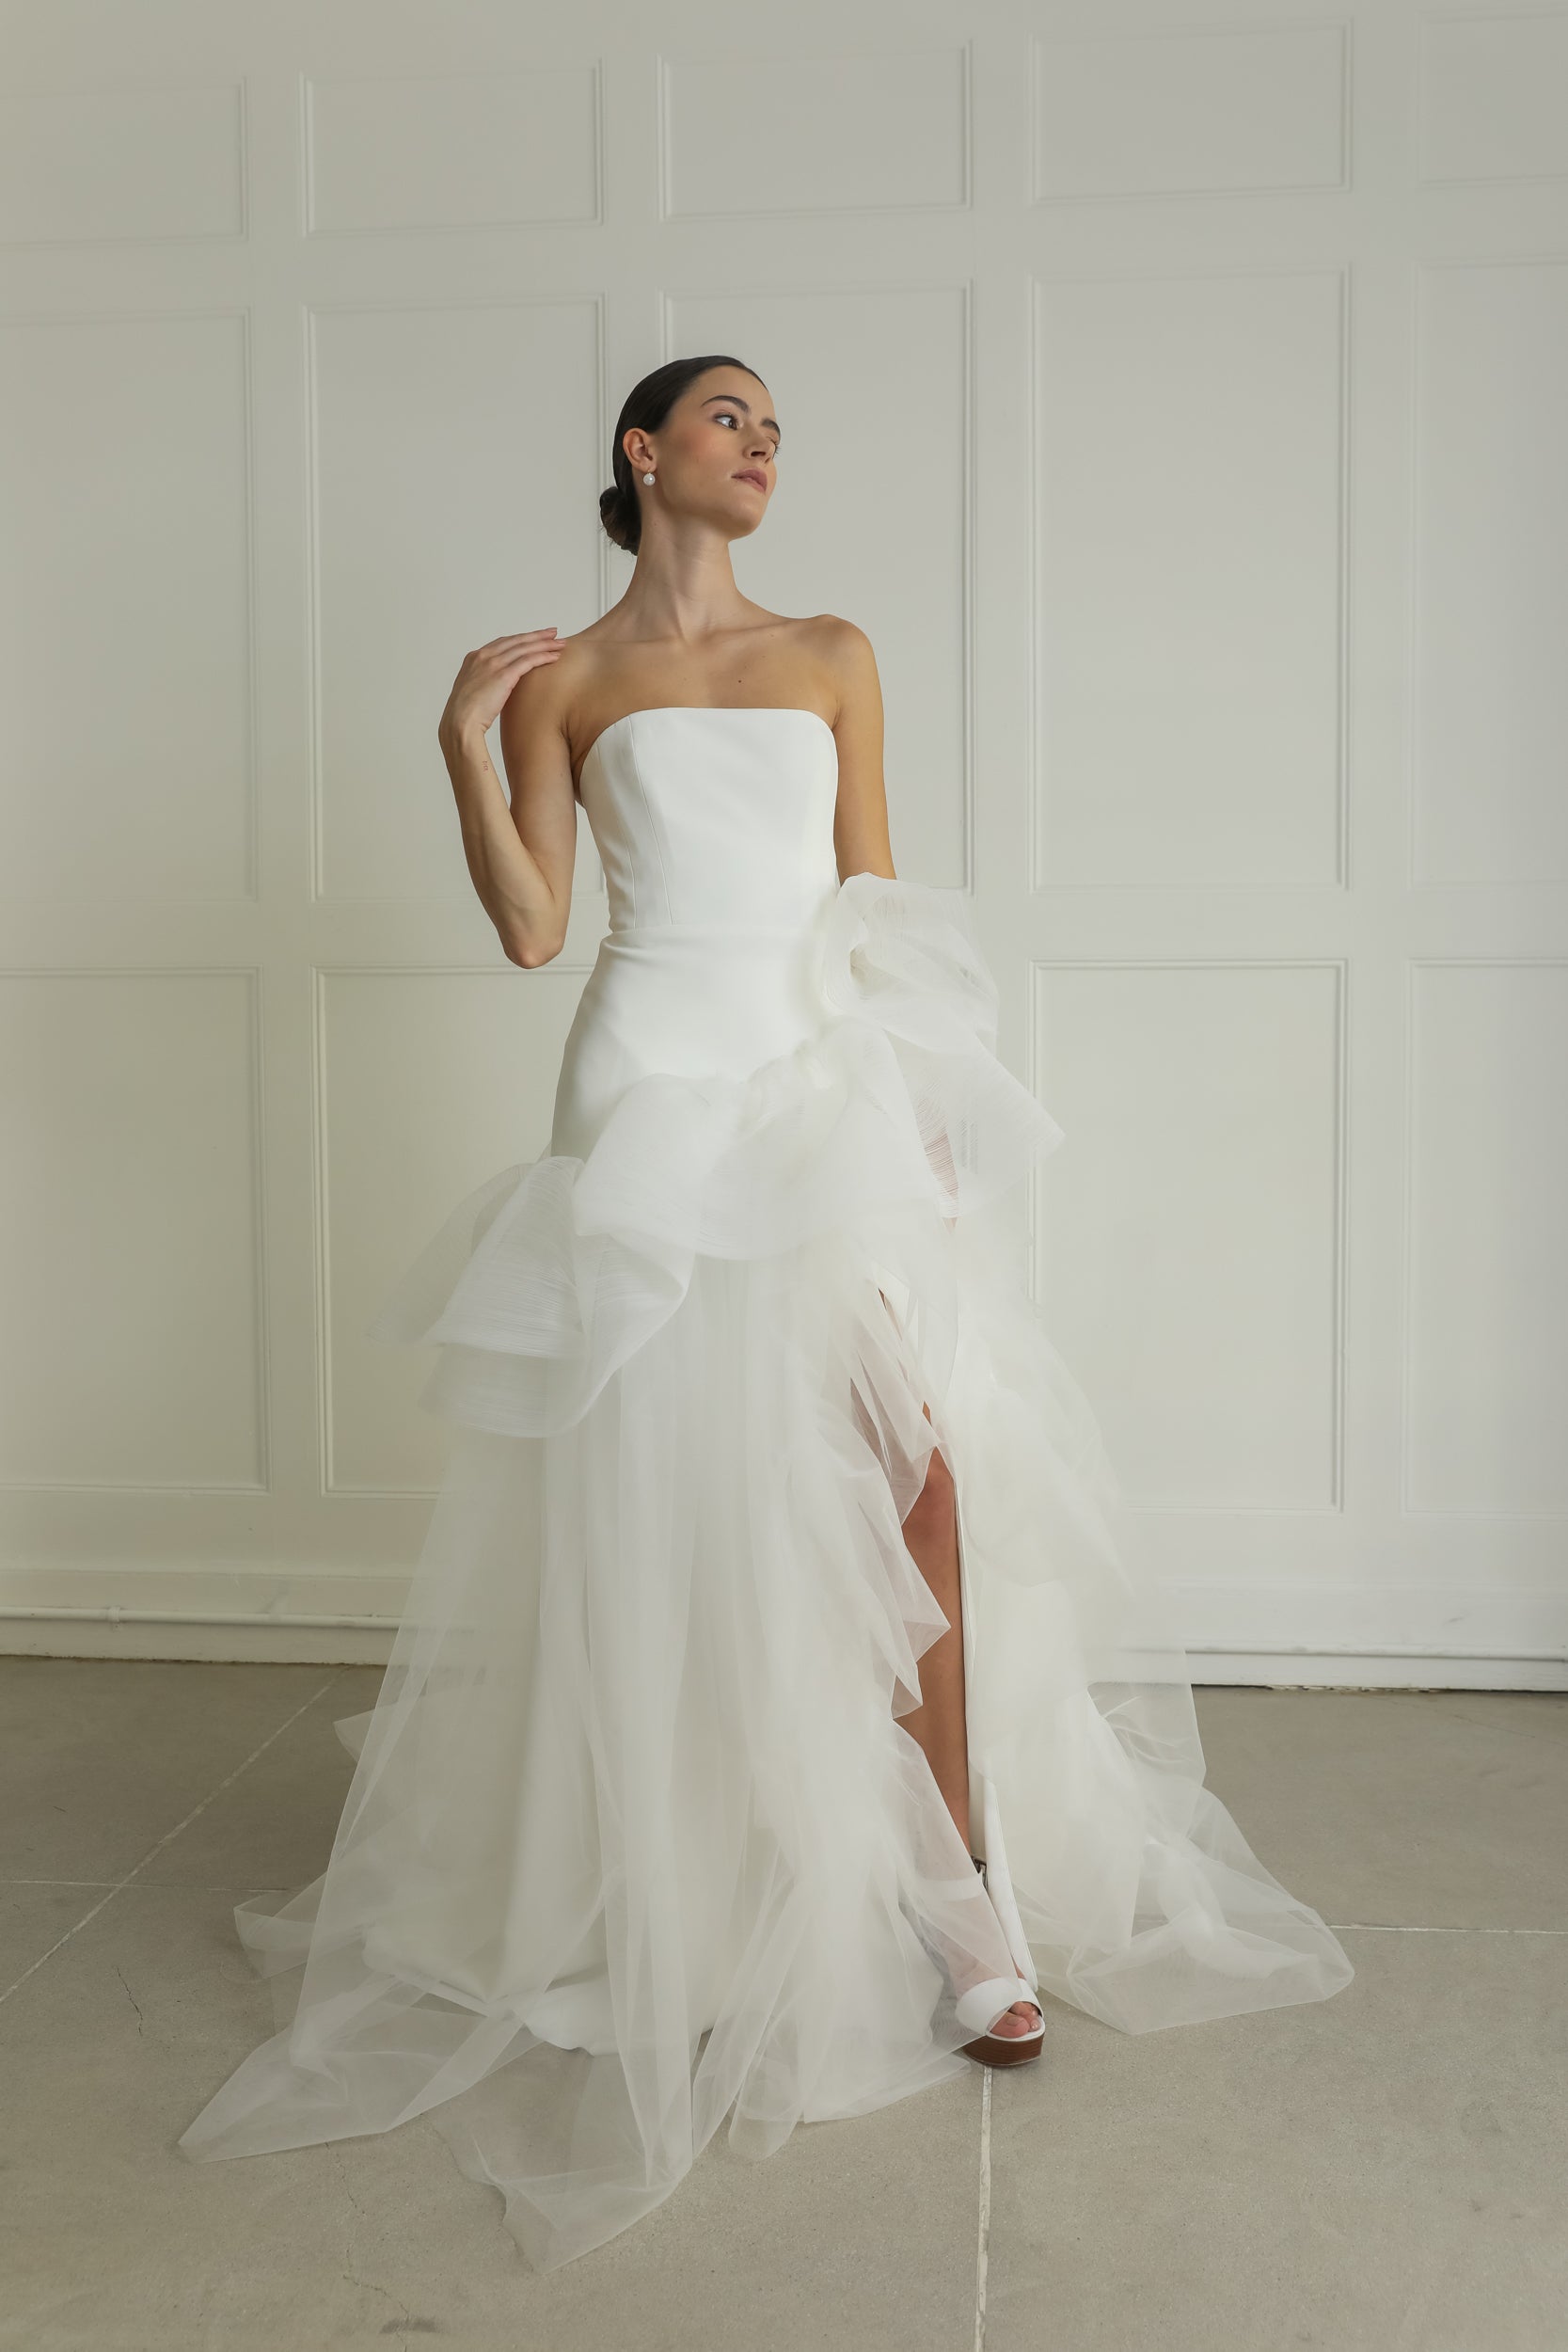 Newhite | A New Definition Of Modern Minimalistic Bridal Gowns ...